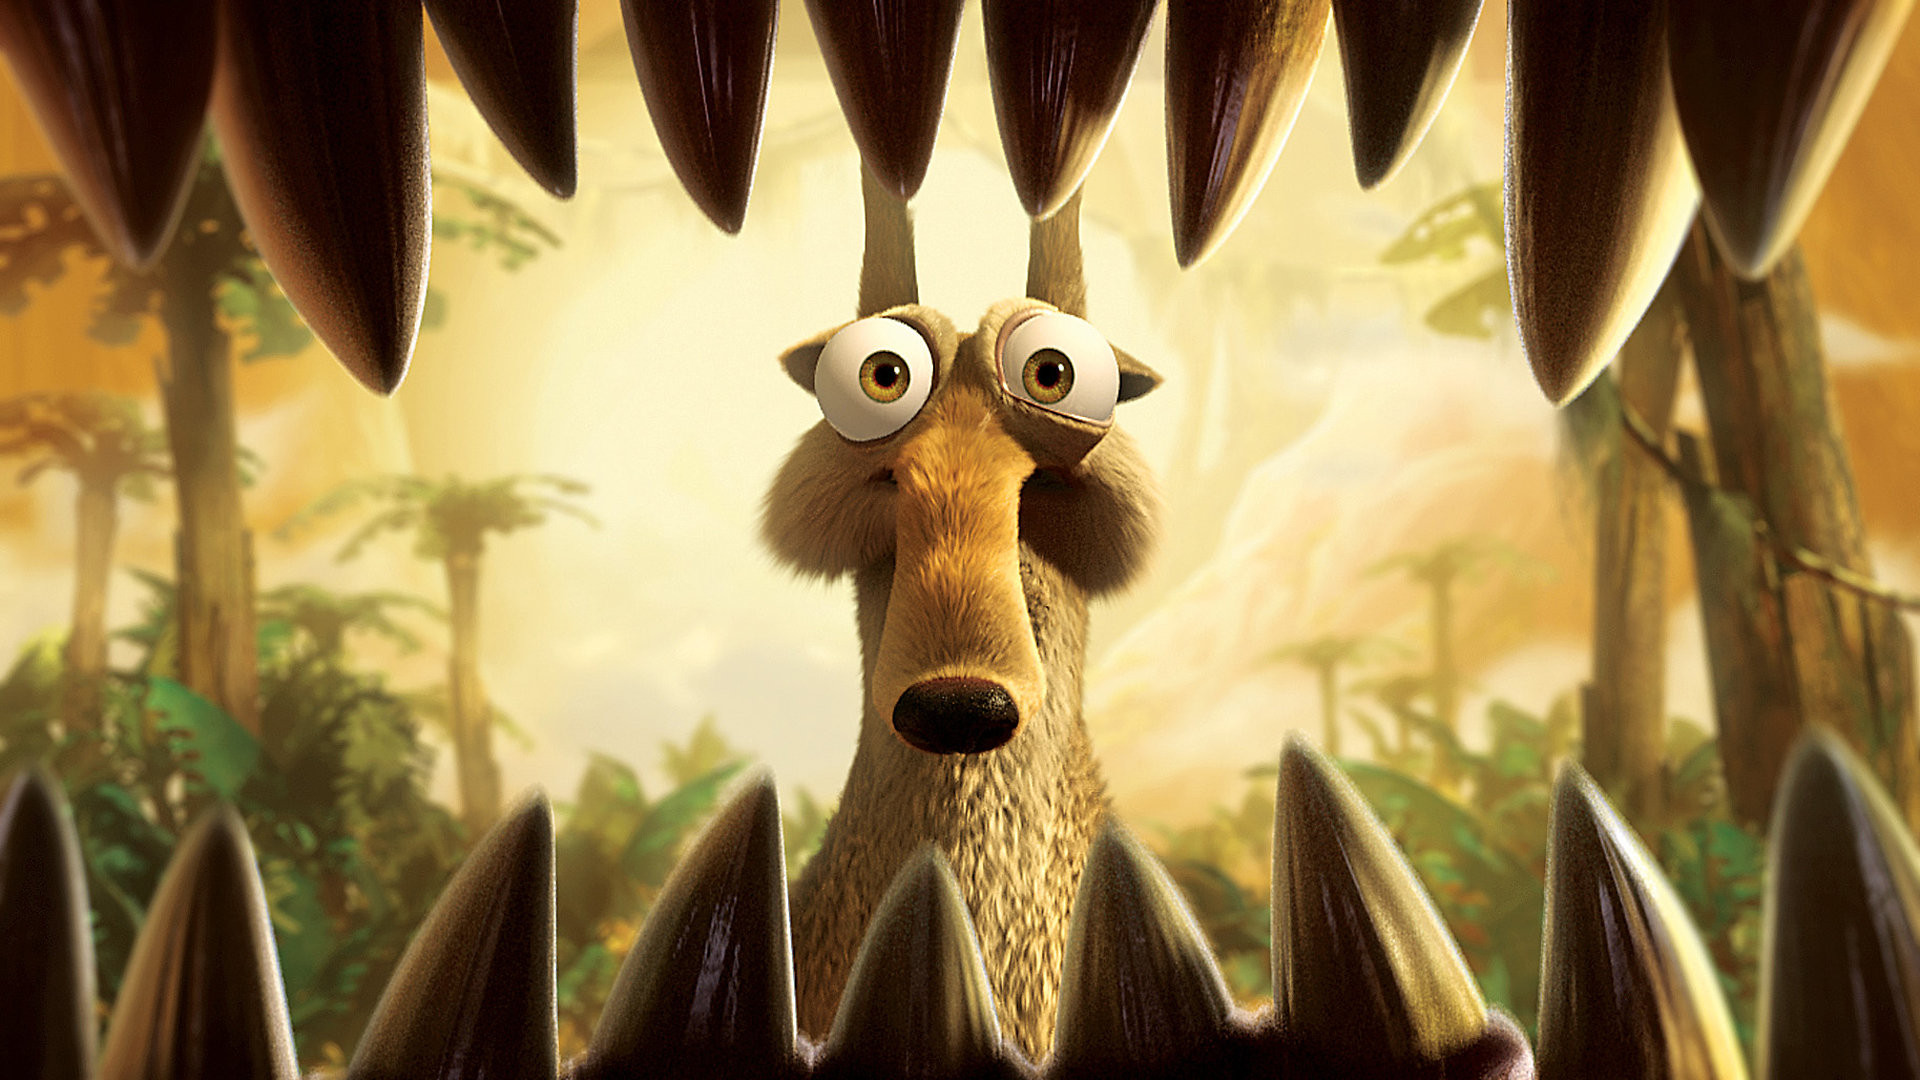 Ice Age: Dawn of the Dinosaurs Art